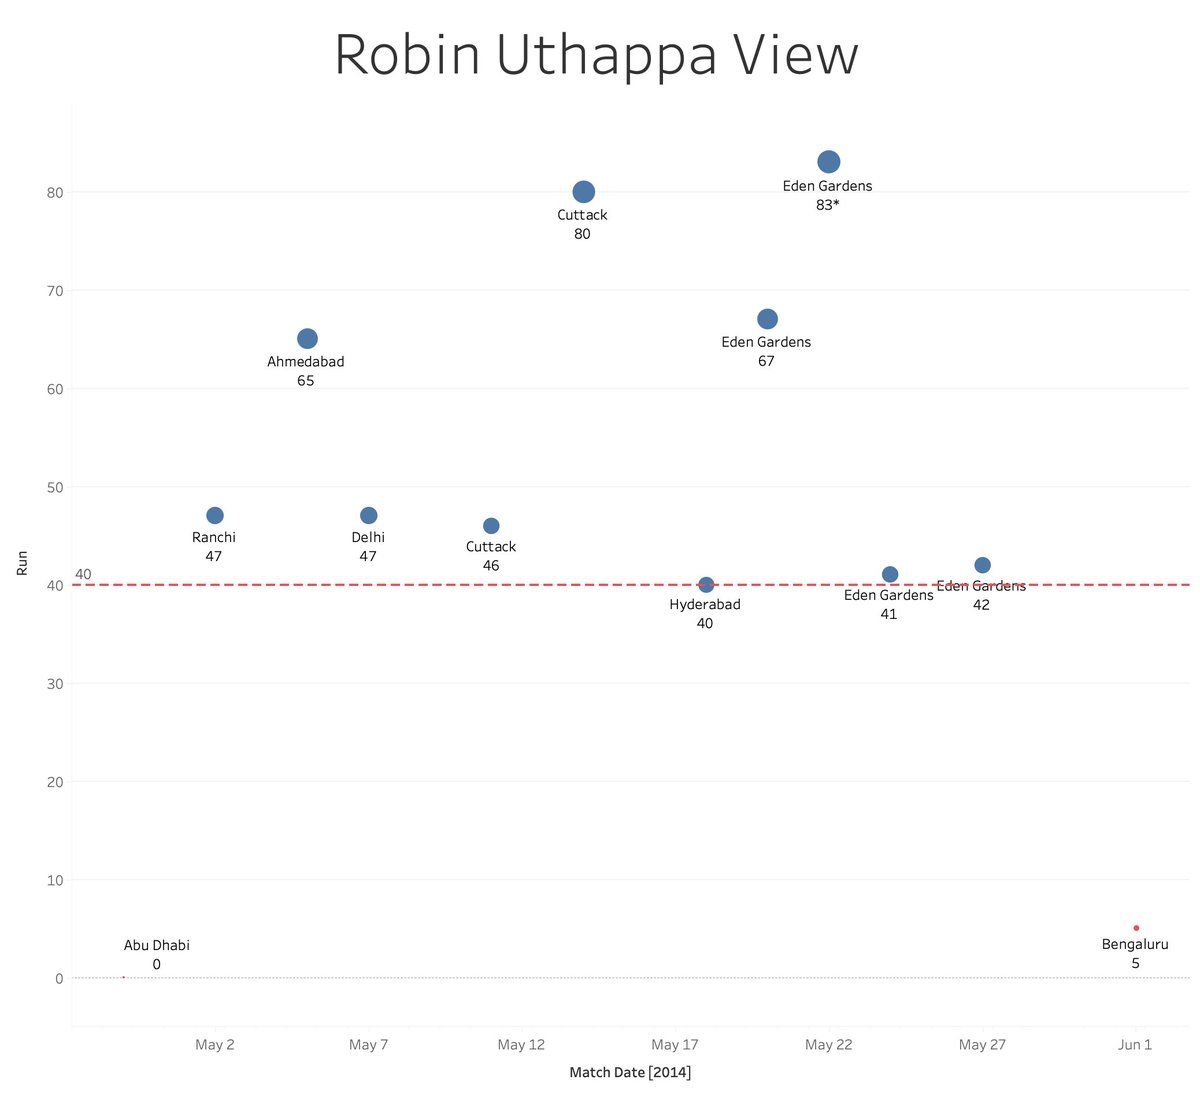 Raising the min threshold to 30 or even 40, Uthappa stands out as only player with a streak of >=10 inns In 2014 season, starting from the Ranchi game through to the Qualifier, Uthappa's lowest score was 40. Over these 10 inns, 558 runs @ avg 62 & SR of 144.18 #CricketTwitter